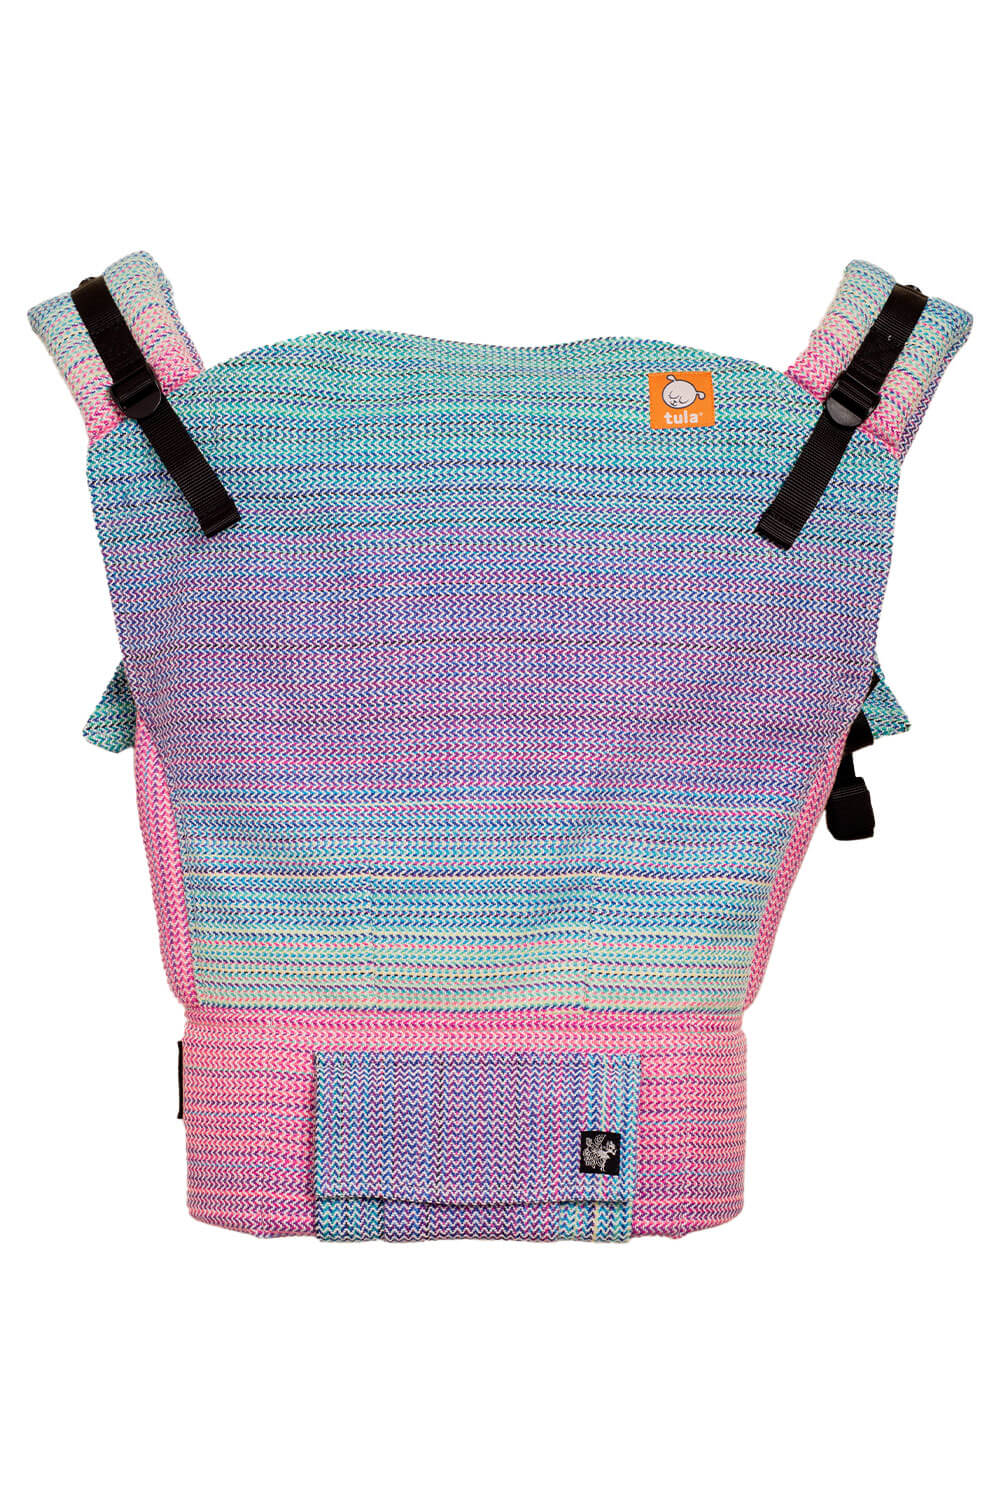 Dreamer - Signature Woven Toddler Baby Carrier